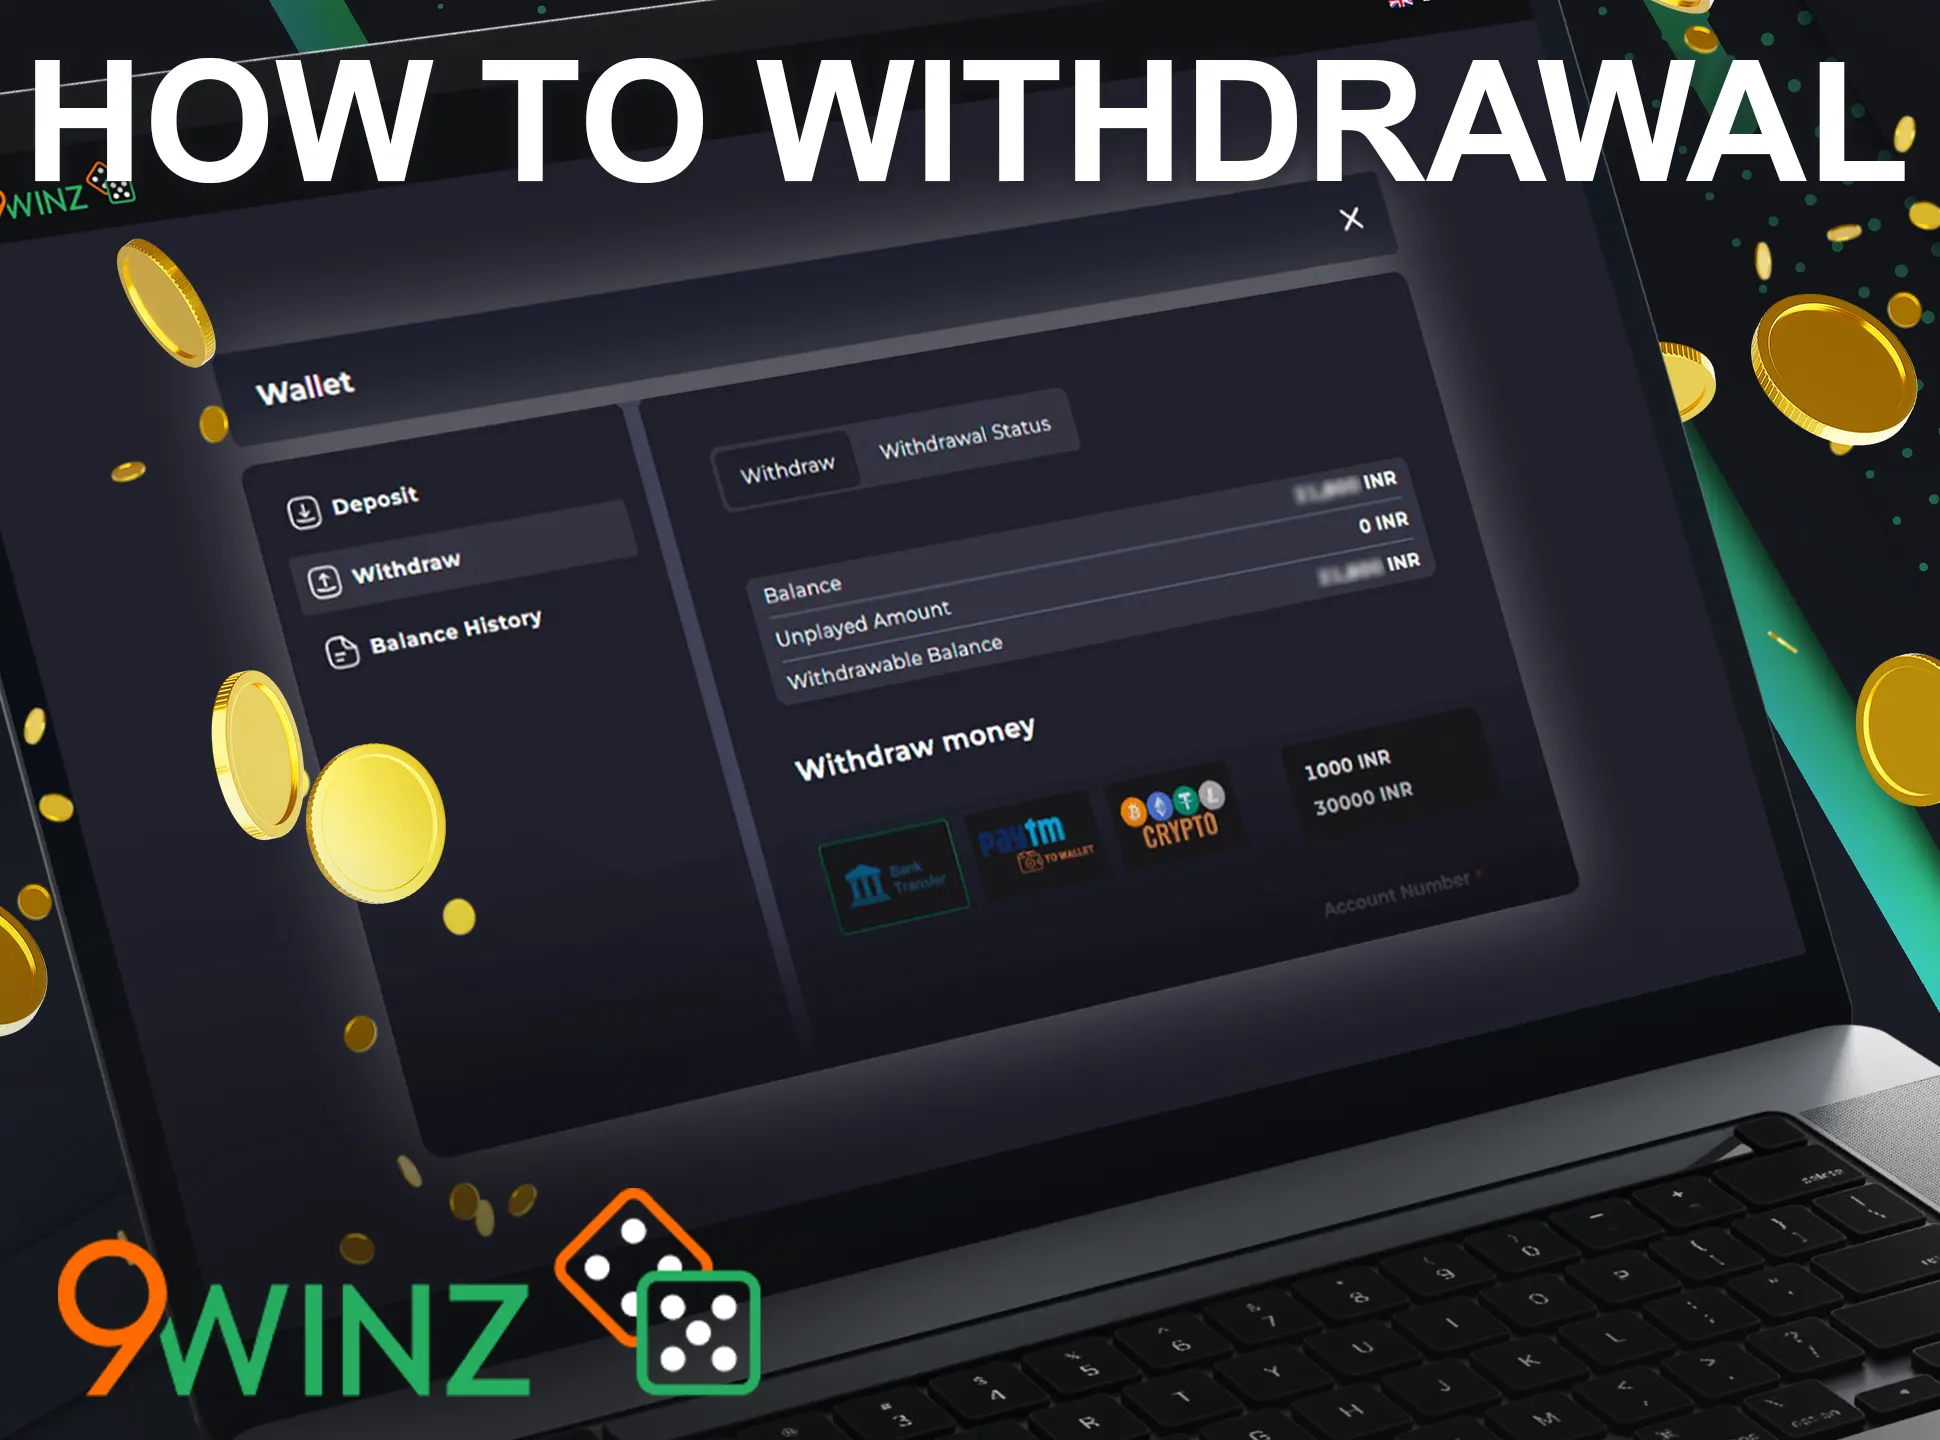 To withdraw funds at 9winz players are required to verify their account.